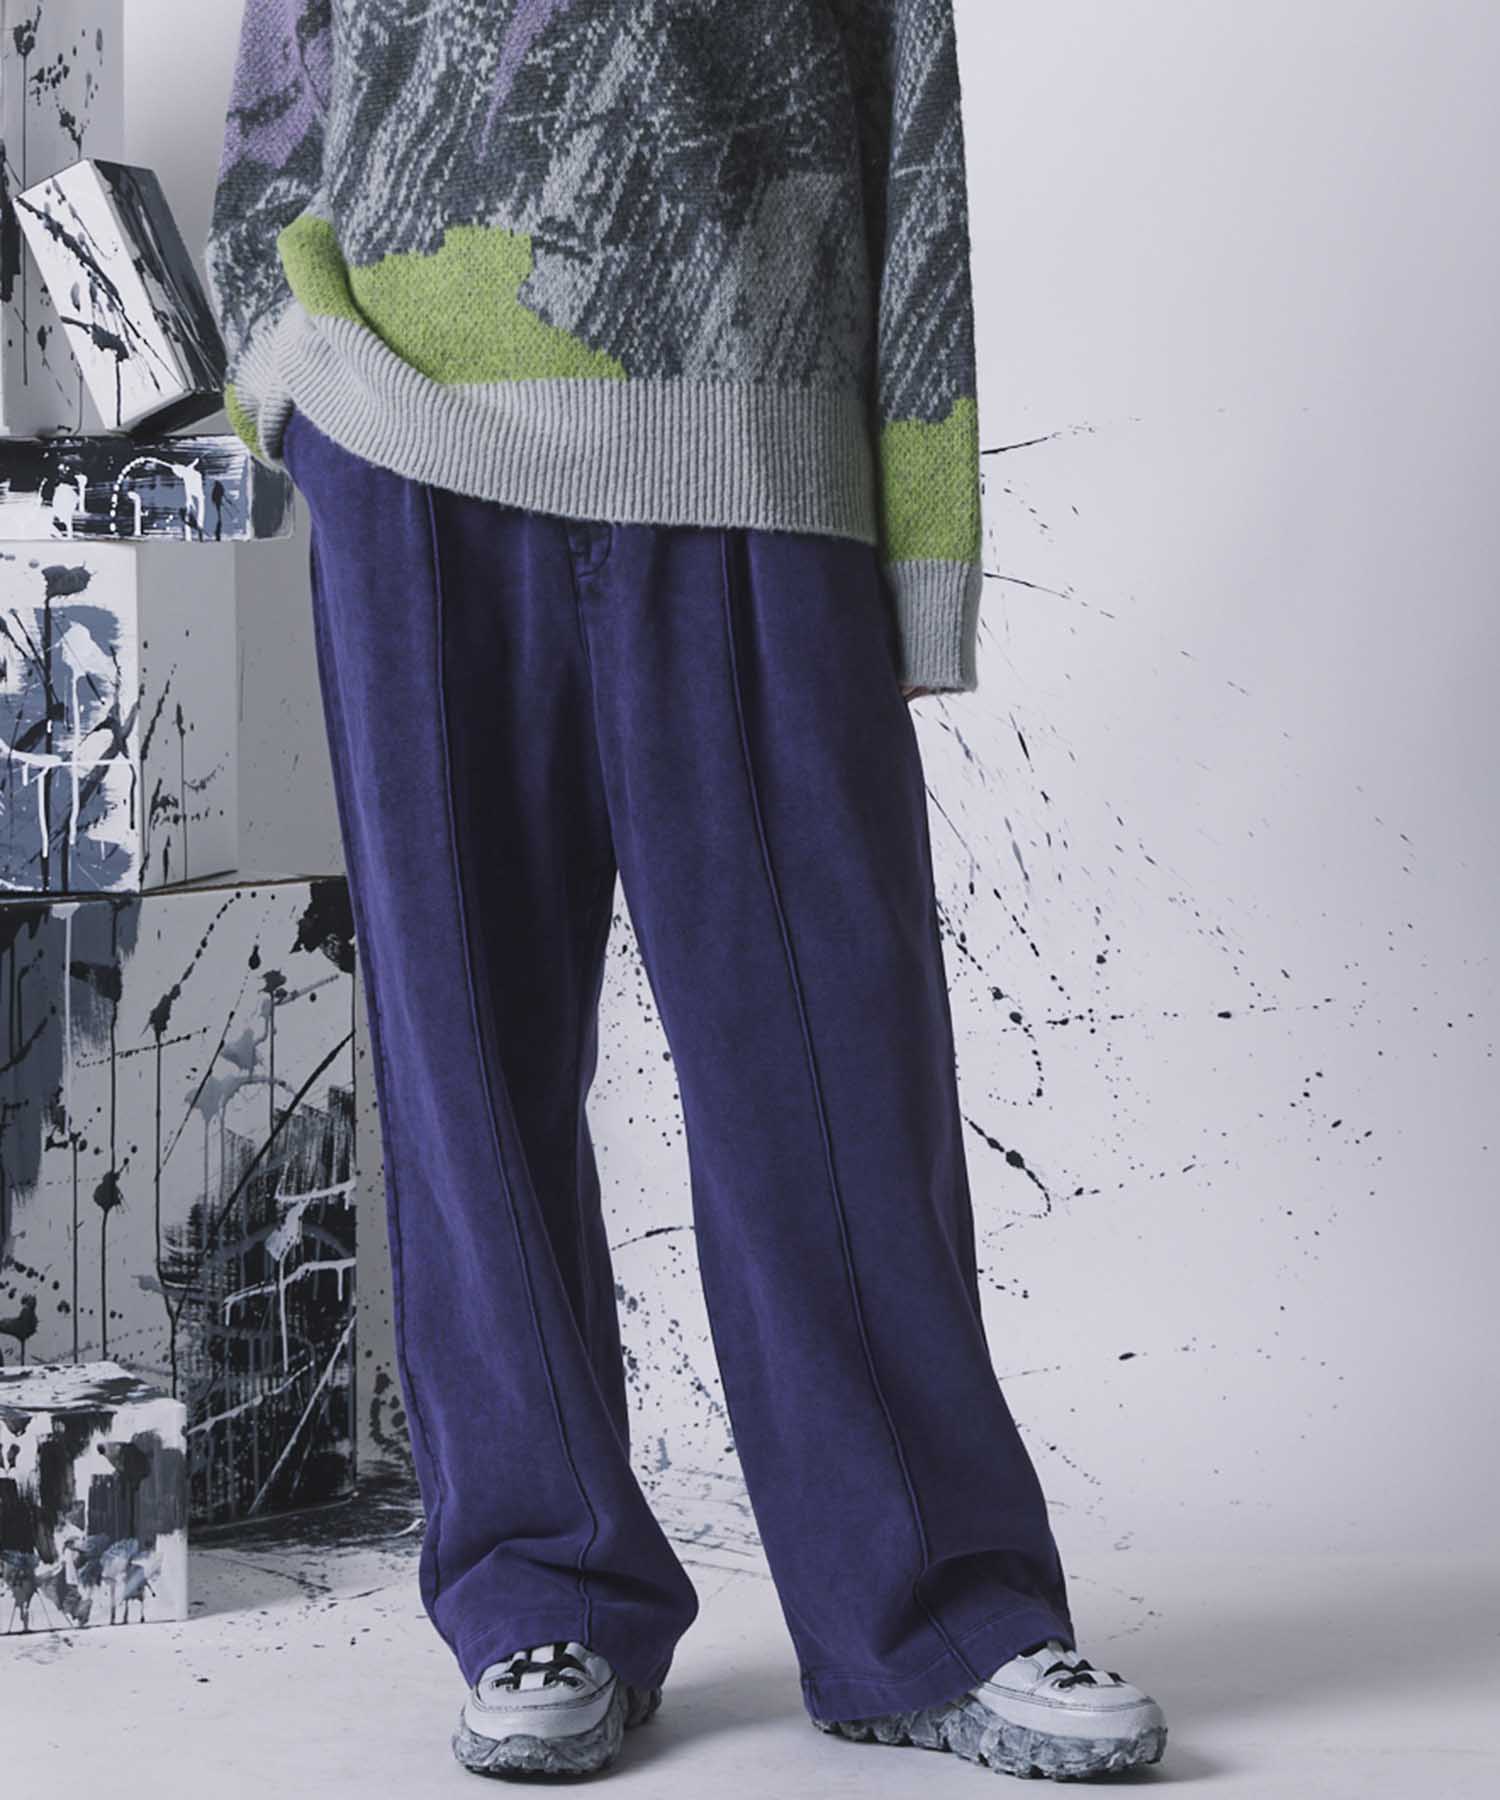 【SALE】Chemical Over-Dye Heavy-Weight Sweat Pin tuck Easy Wide Pants